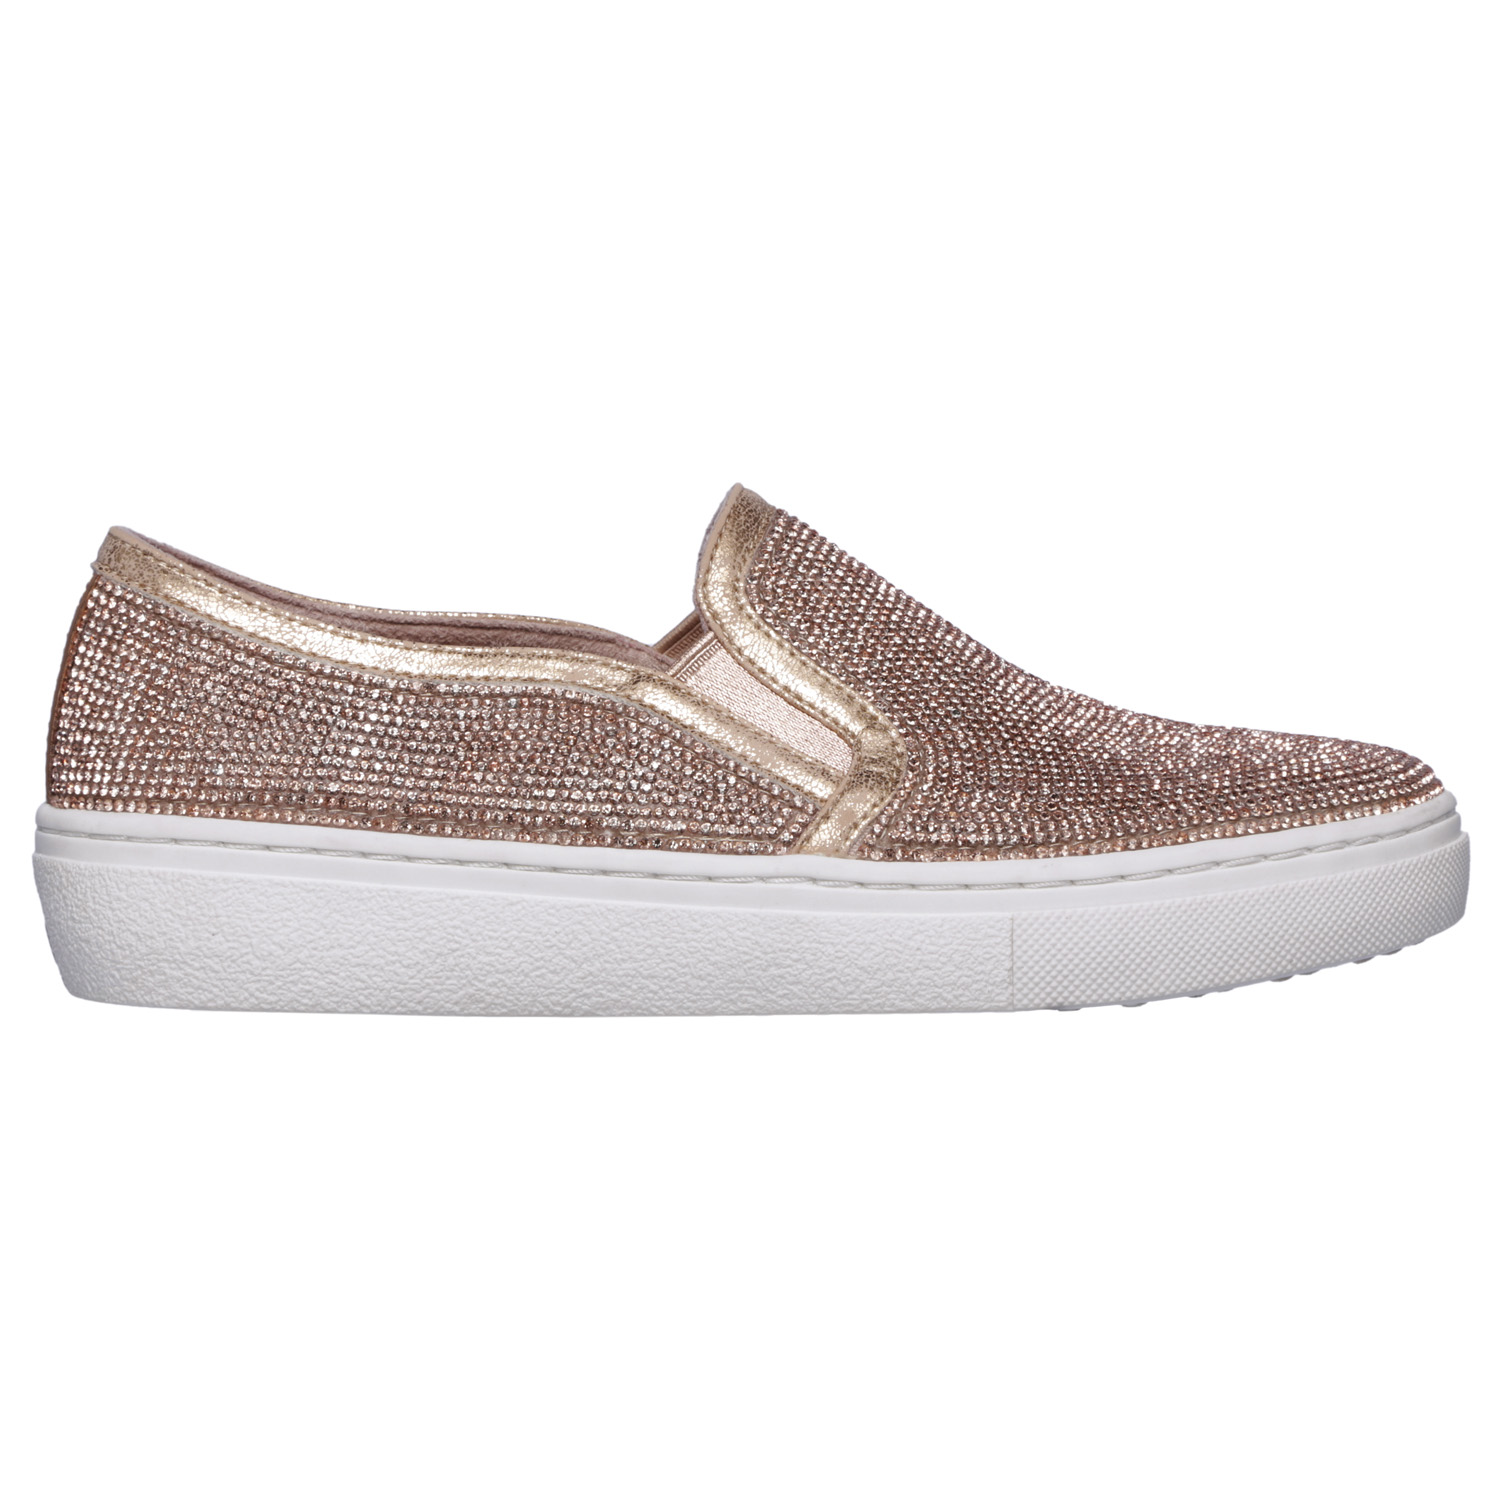 skechers womens sparkly shoes